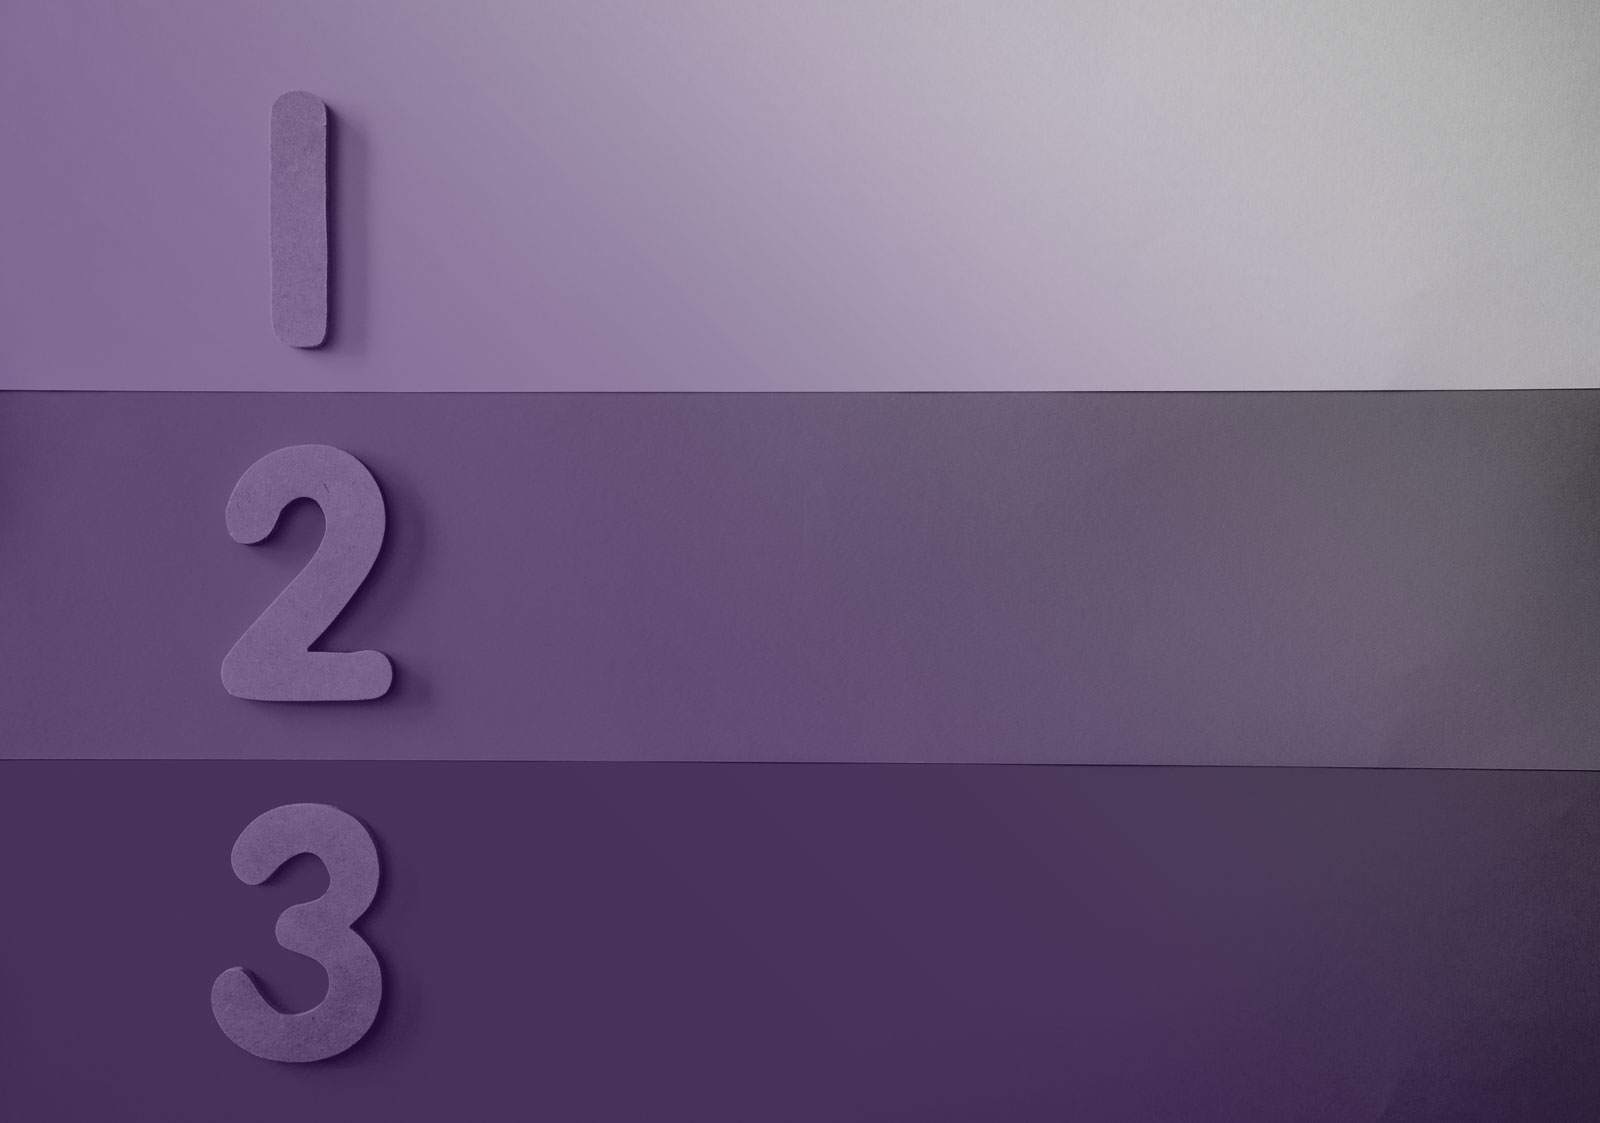 The numbers 1, 2 and 3 in different shades of violet